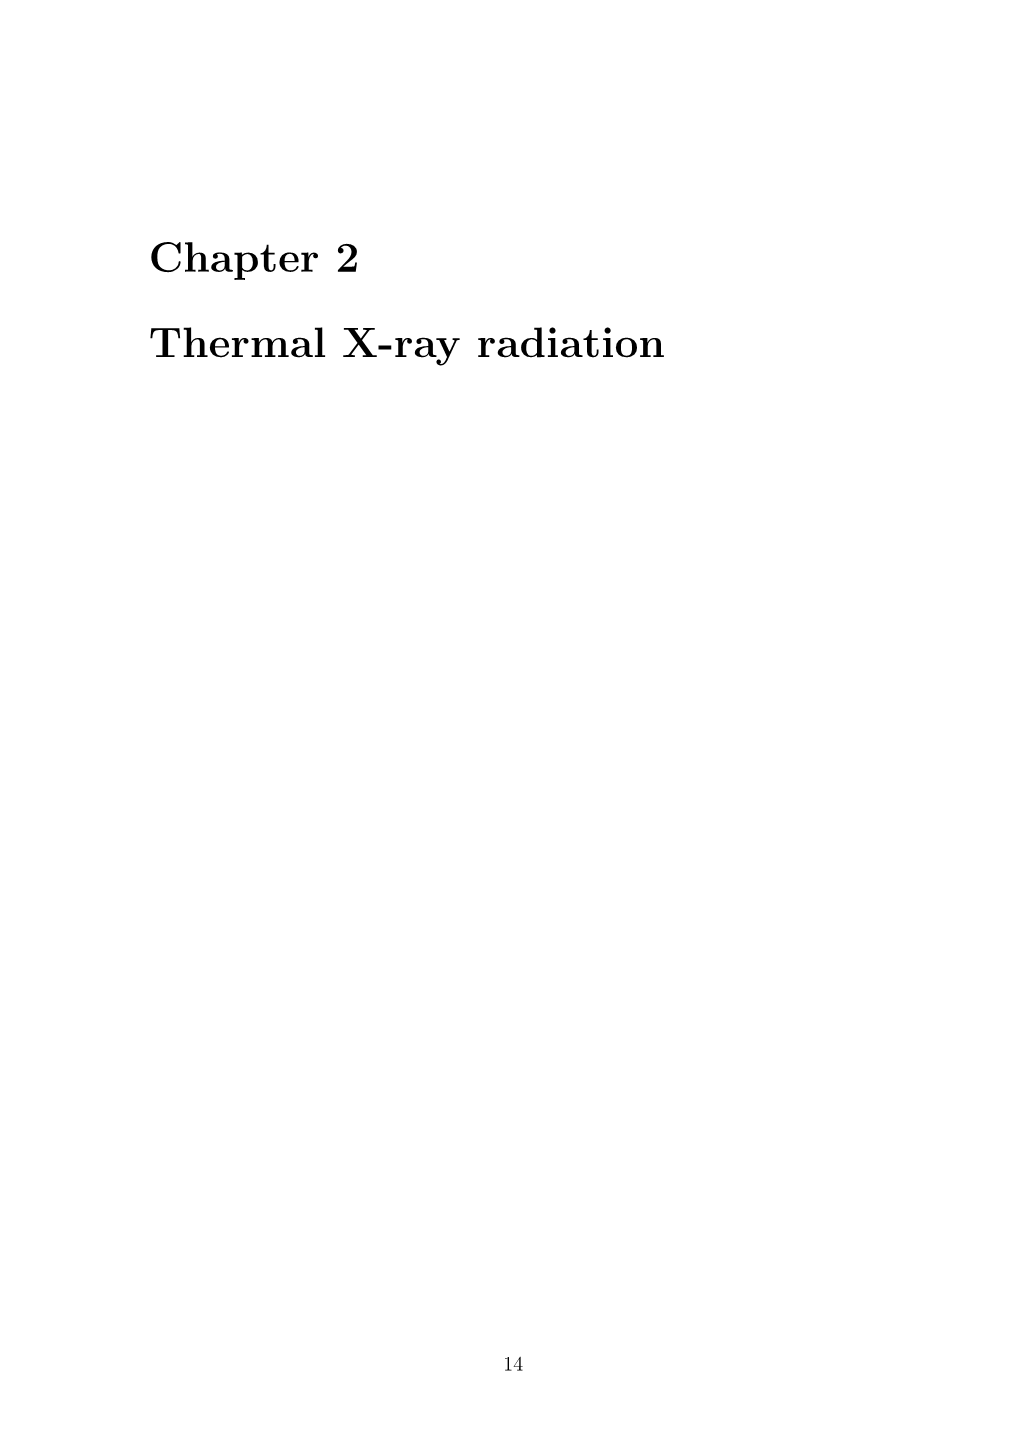 Chapter 2 Thermal X-Ray Radiation